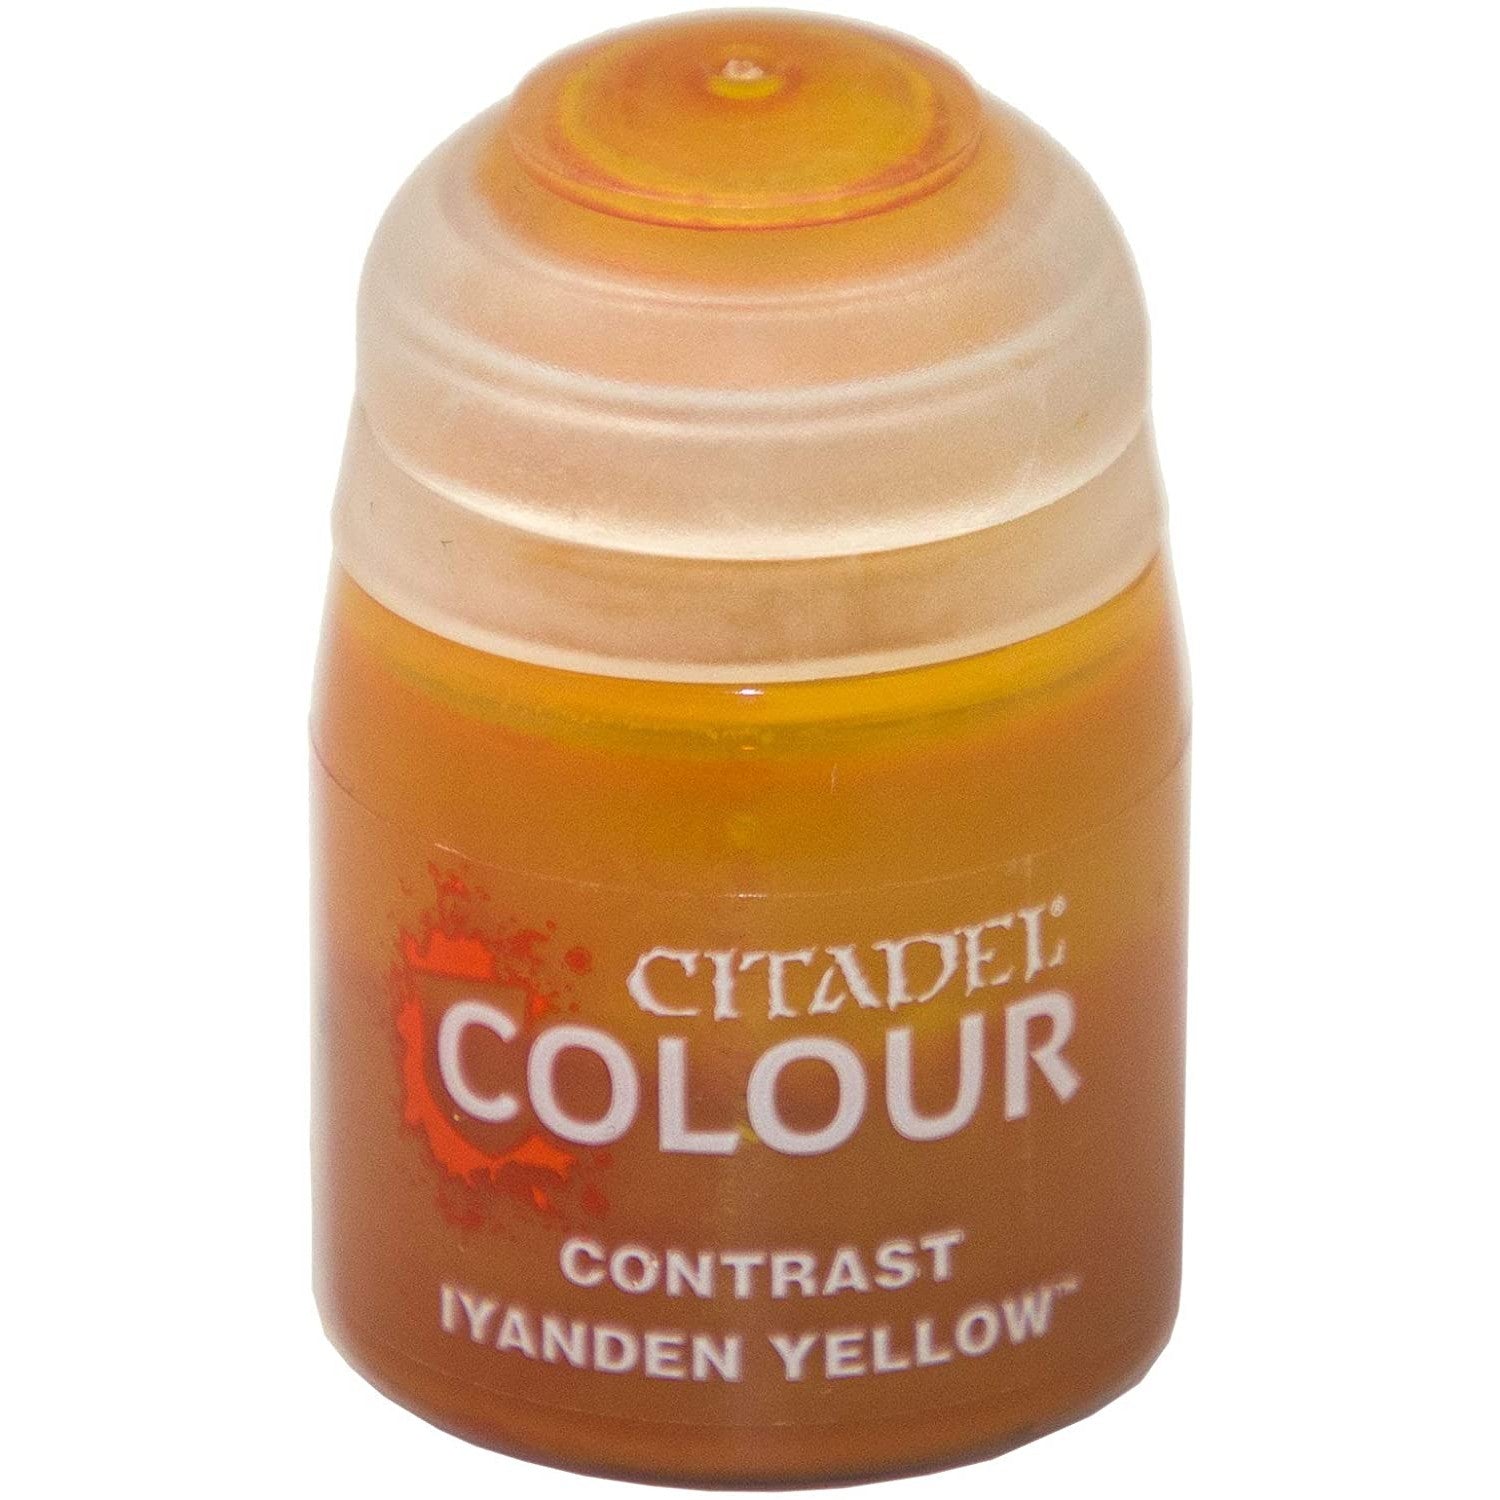 CITADEL CONTRAST PAINT COLLECTION 2019 